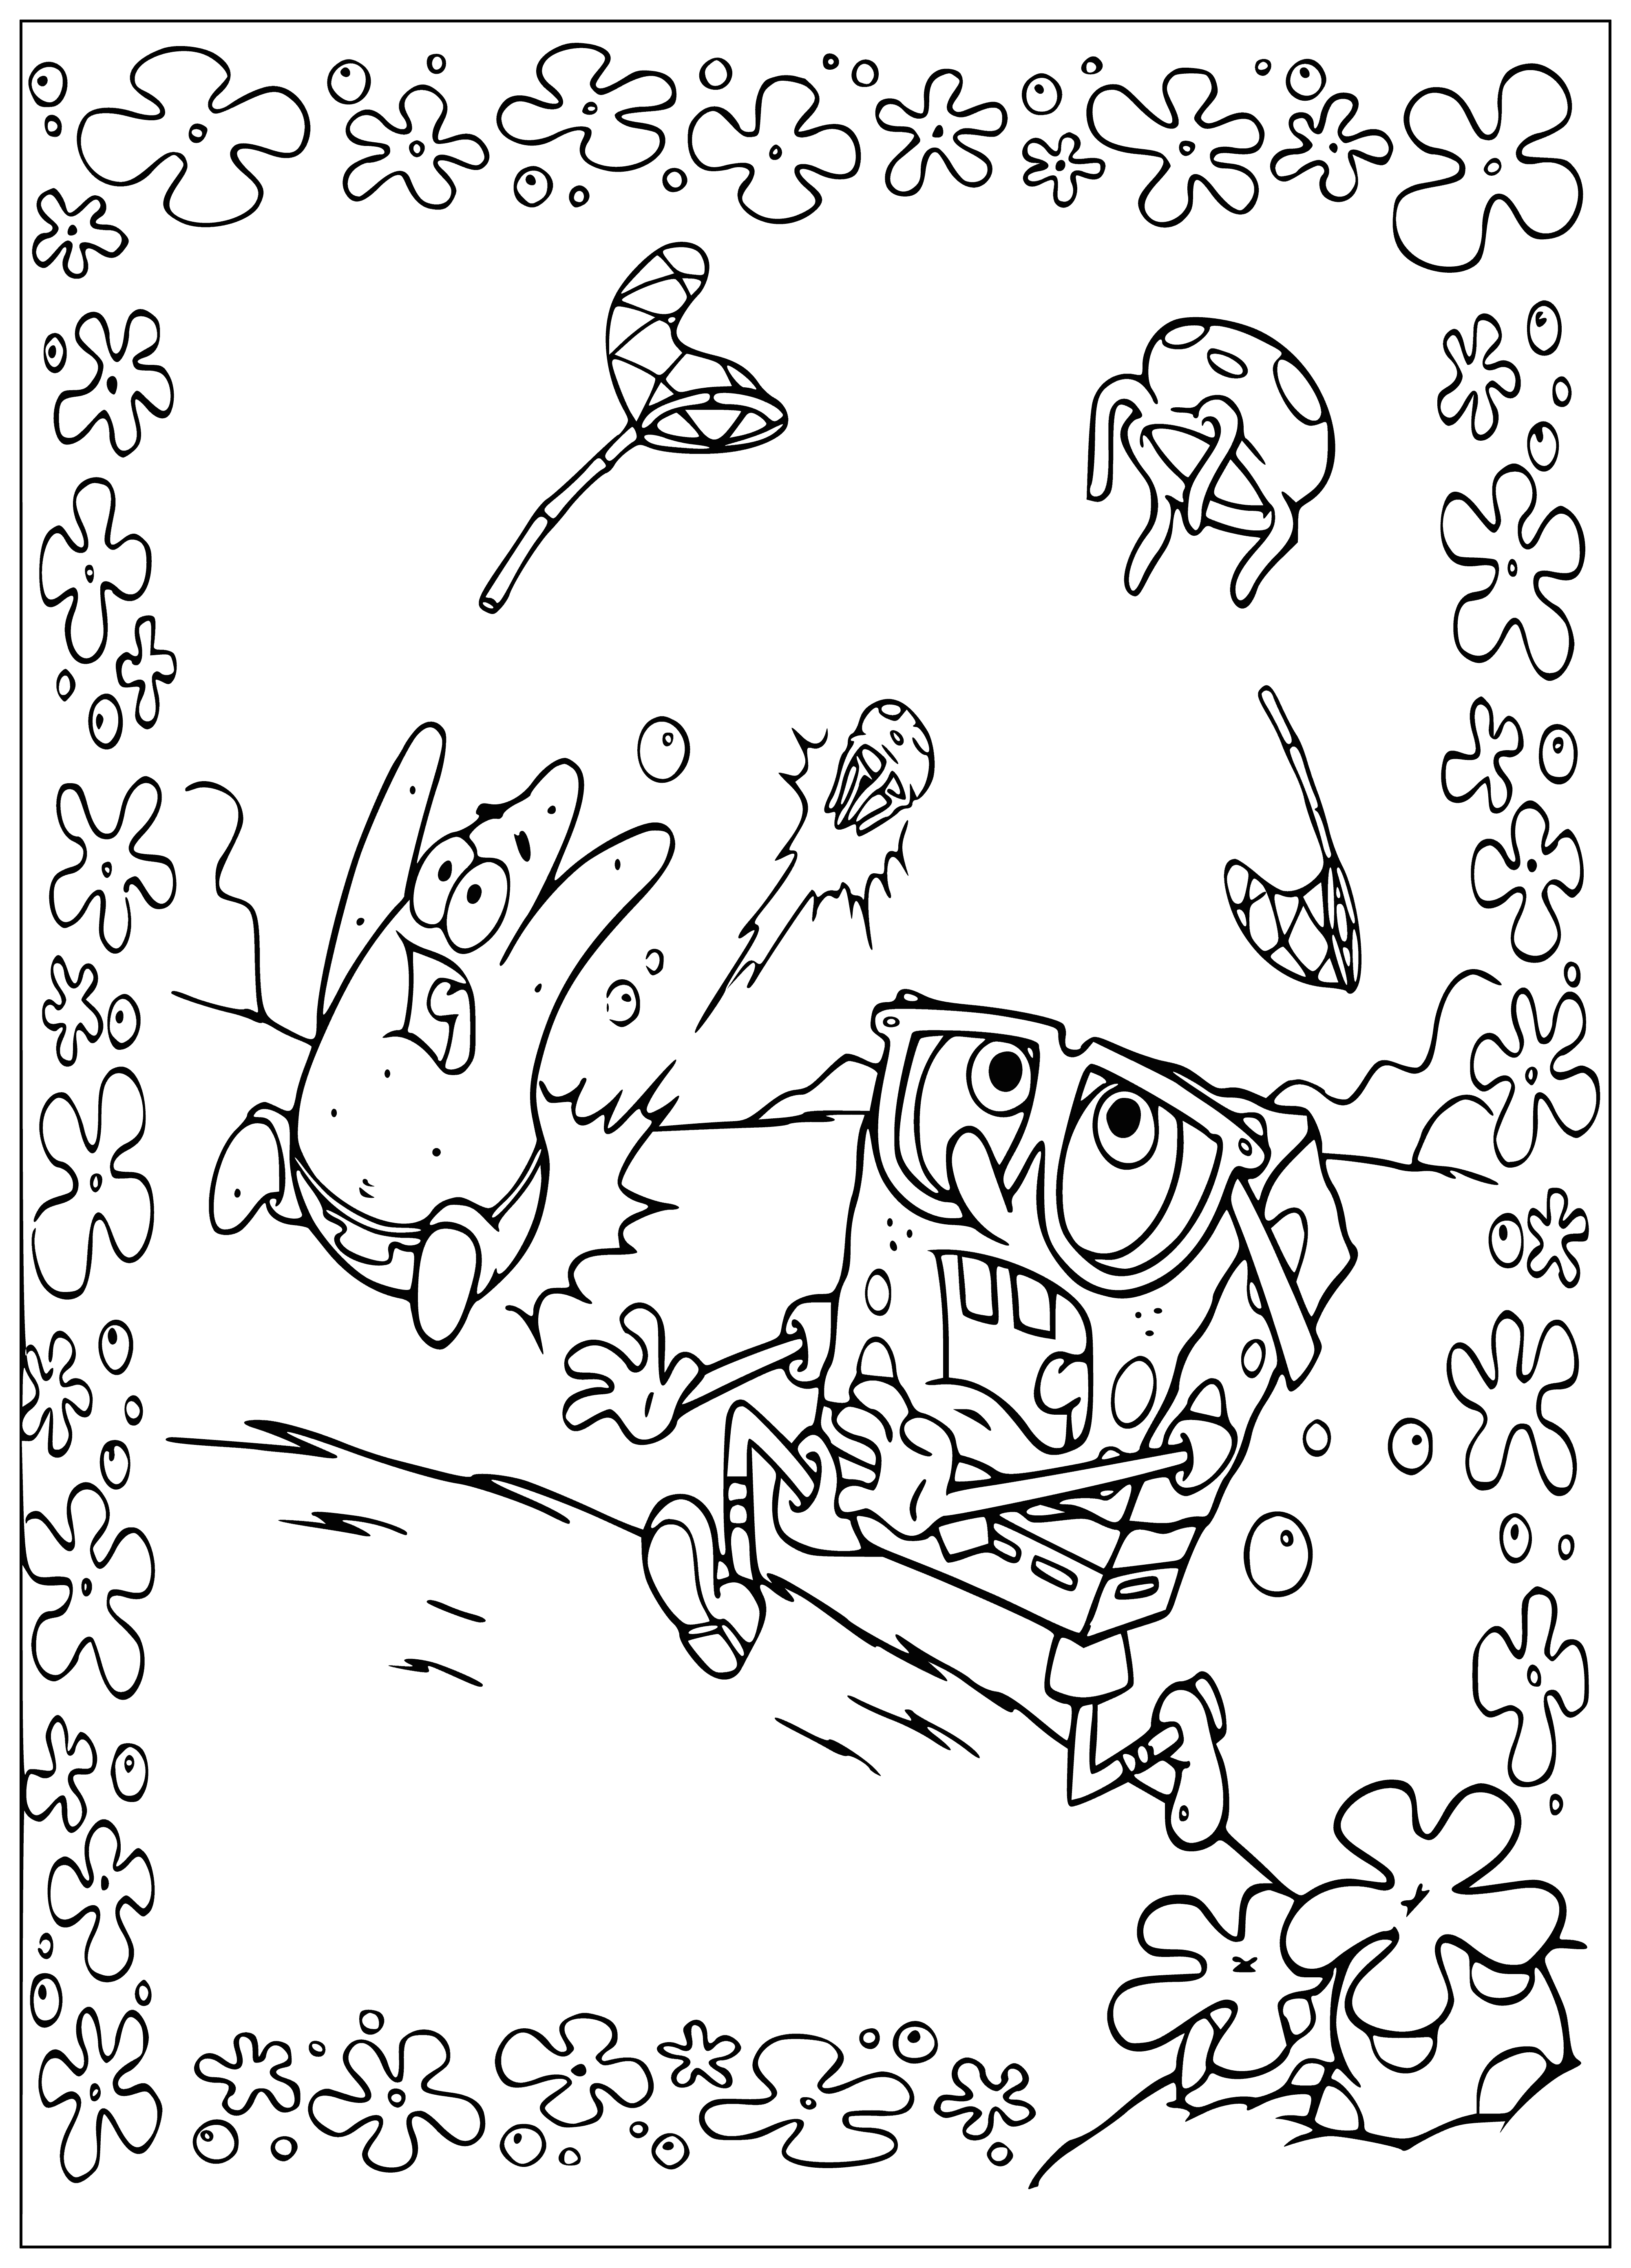 coloring page: SpongeBob frantically runs away from jellyfish in this Jellyfish Attack coloring page.